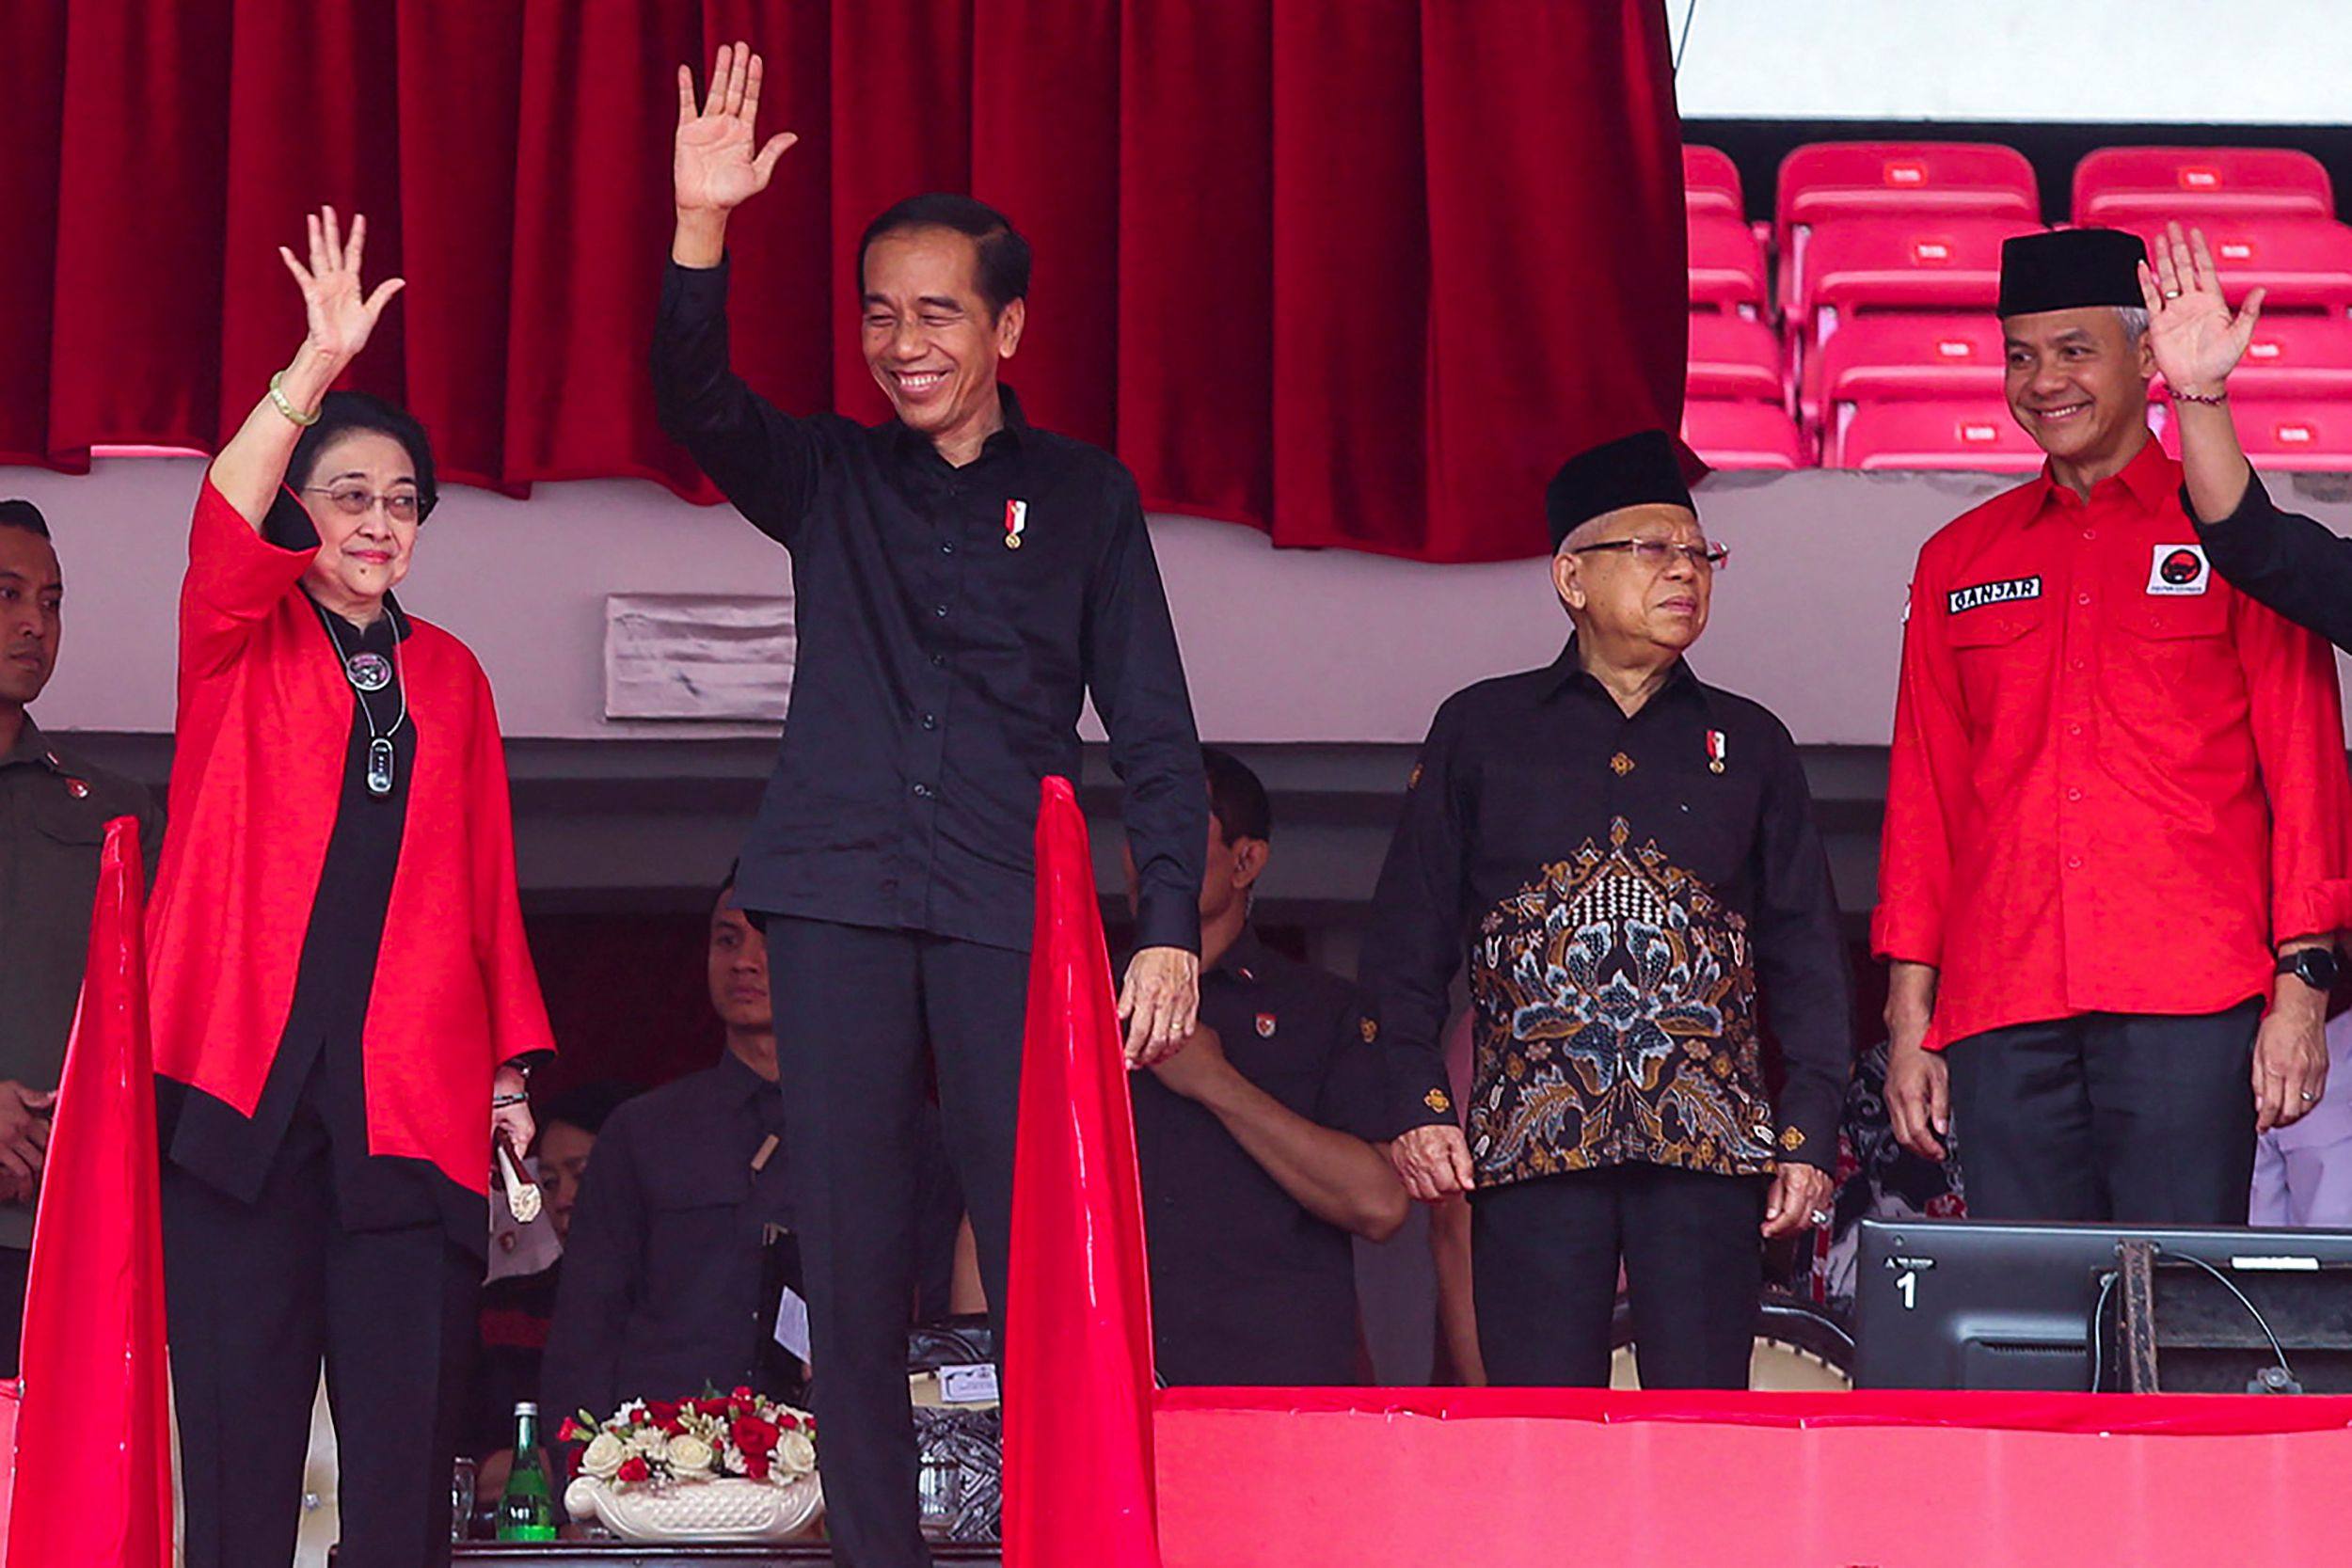 From left: Indonesia’s former president Megawati, President Joko Widodo, Vice-President Maruf Amin and presidential candidate Ganjar Pranowo attend the celebration of ‘Sukarno’s Month’, named for the nation’s founder, in Jakarta. Photo: AFP